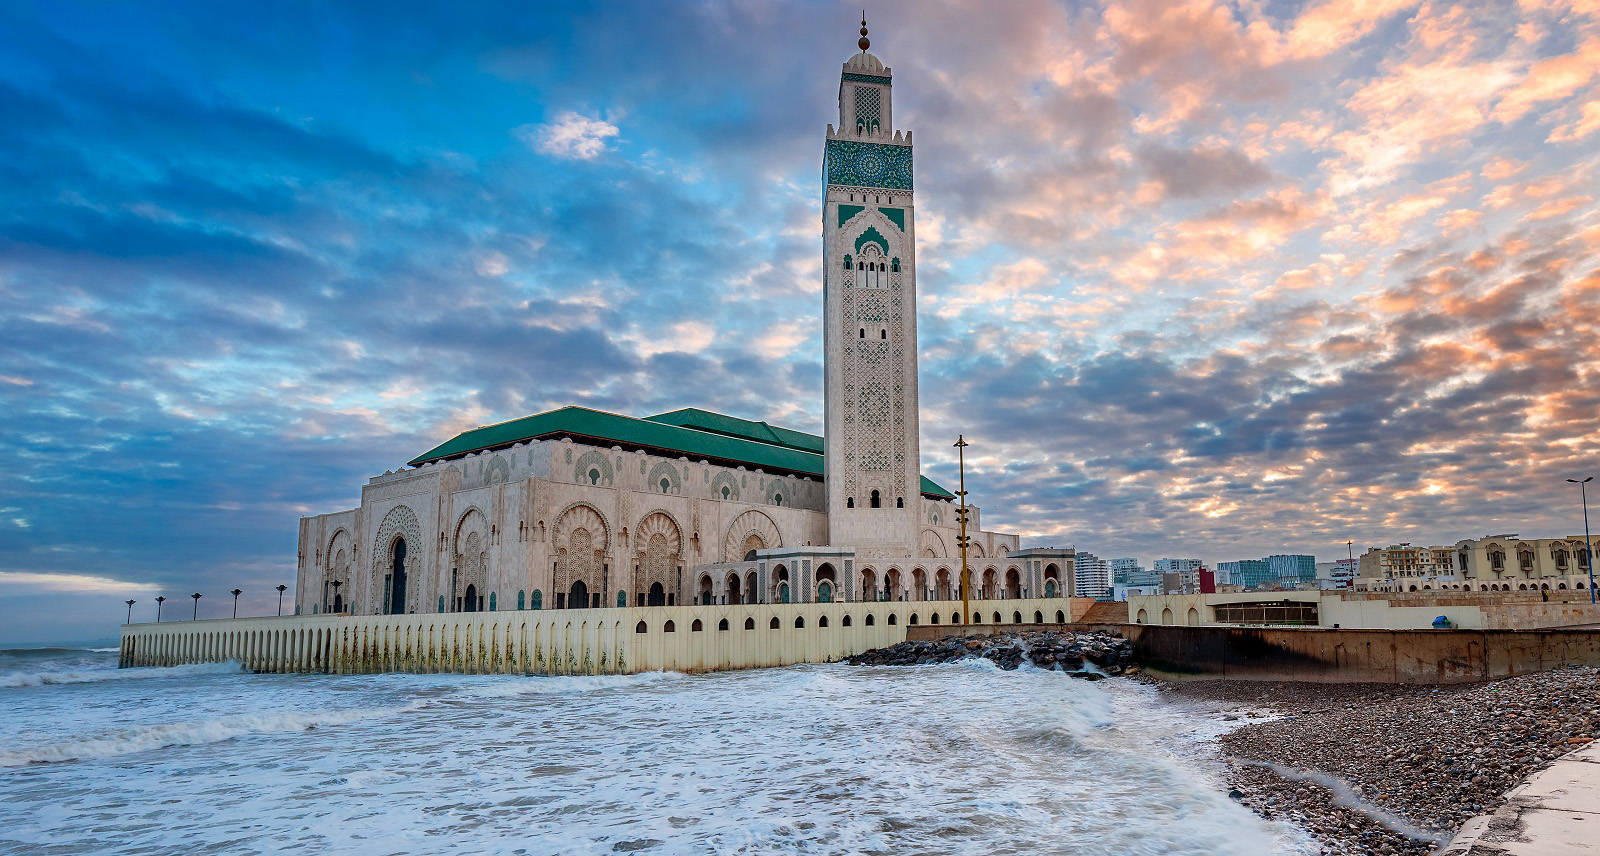 Hassan II Mosque of Morocco - A Royal Monument Built on Atlantic Ocean